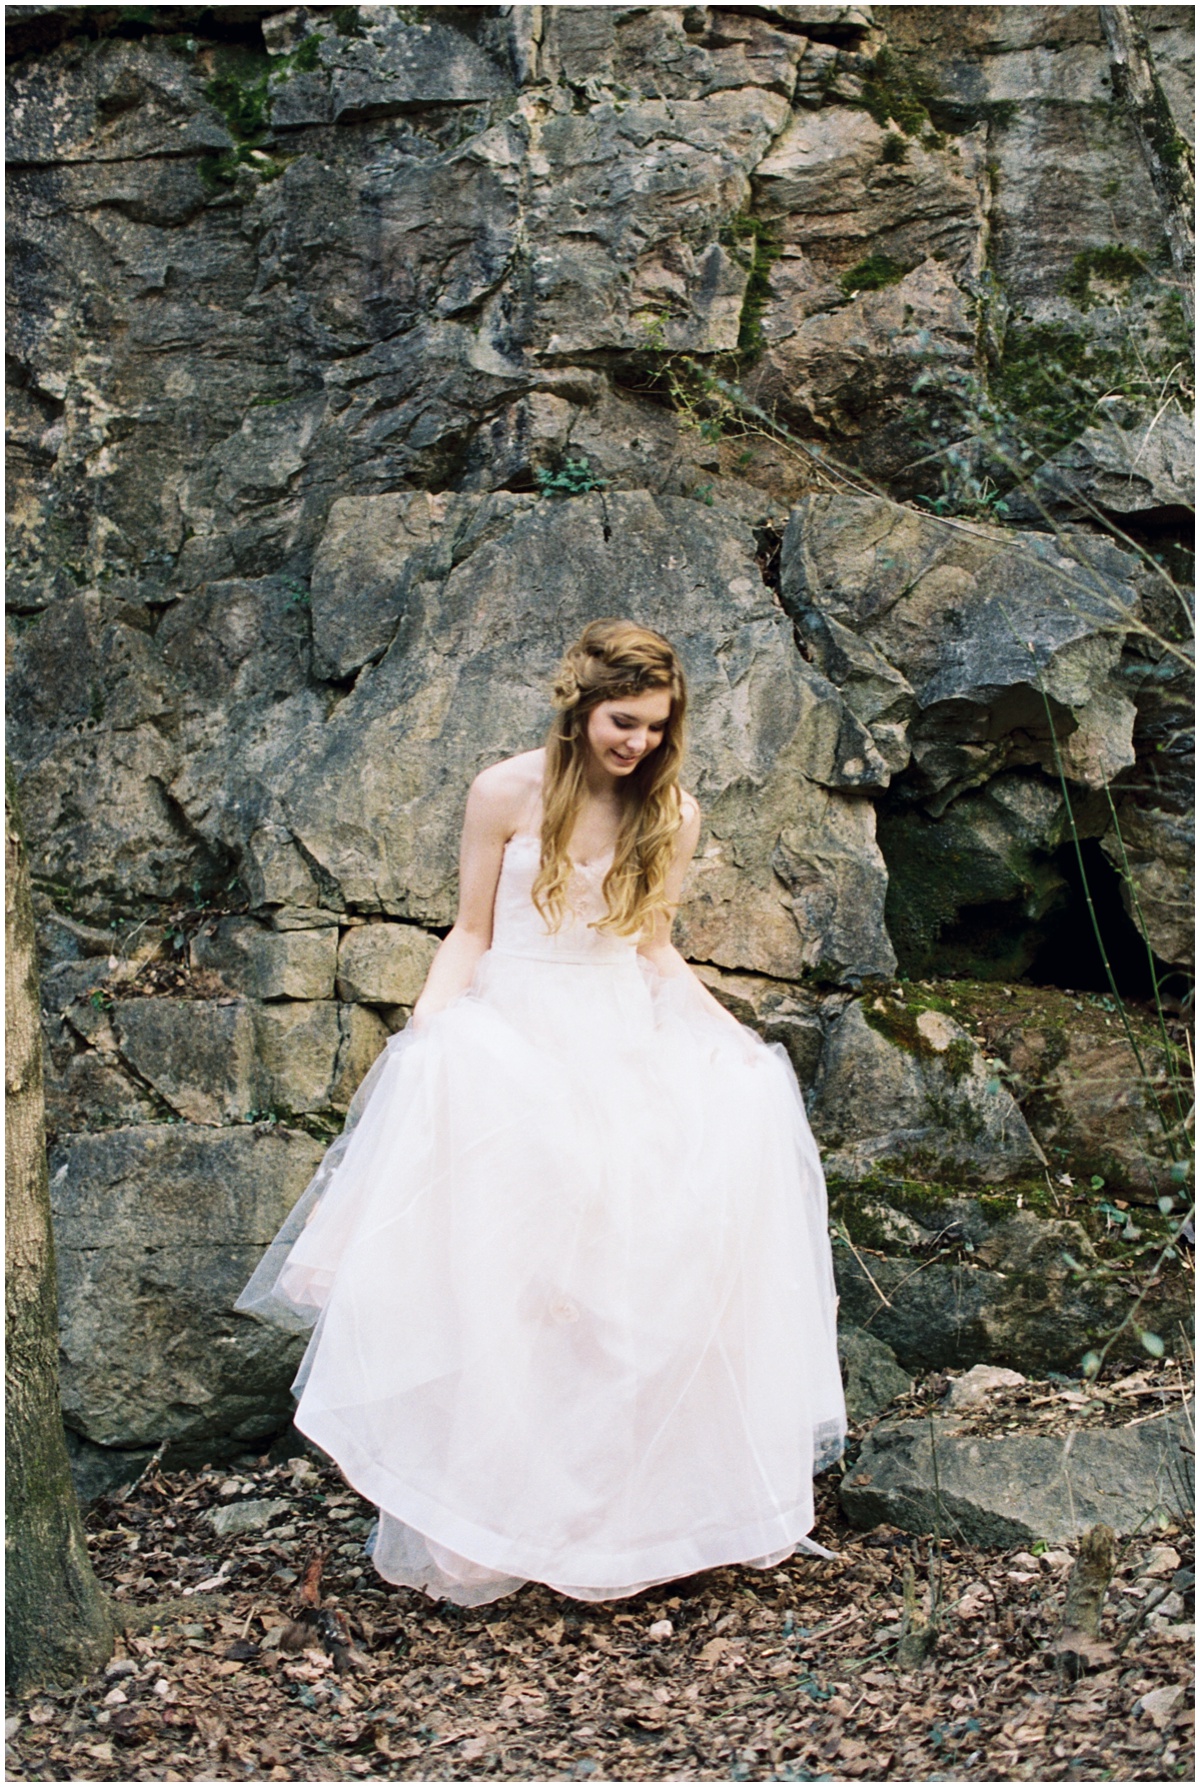 Abigail_Malone_Film_Wedding_Photography_KNoxville_TN_Blush_Dress_Outdoor_Windy_Pink_and_Green_Wedding_0039.jpg